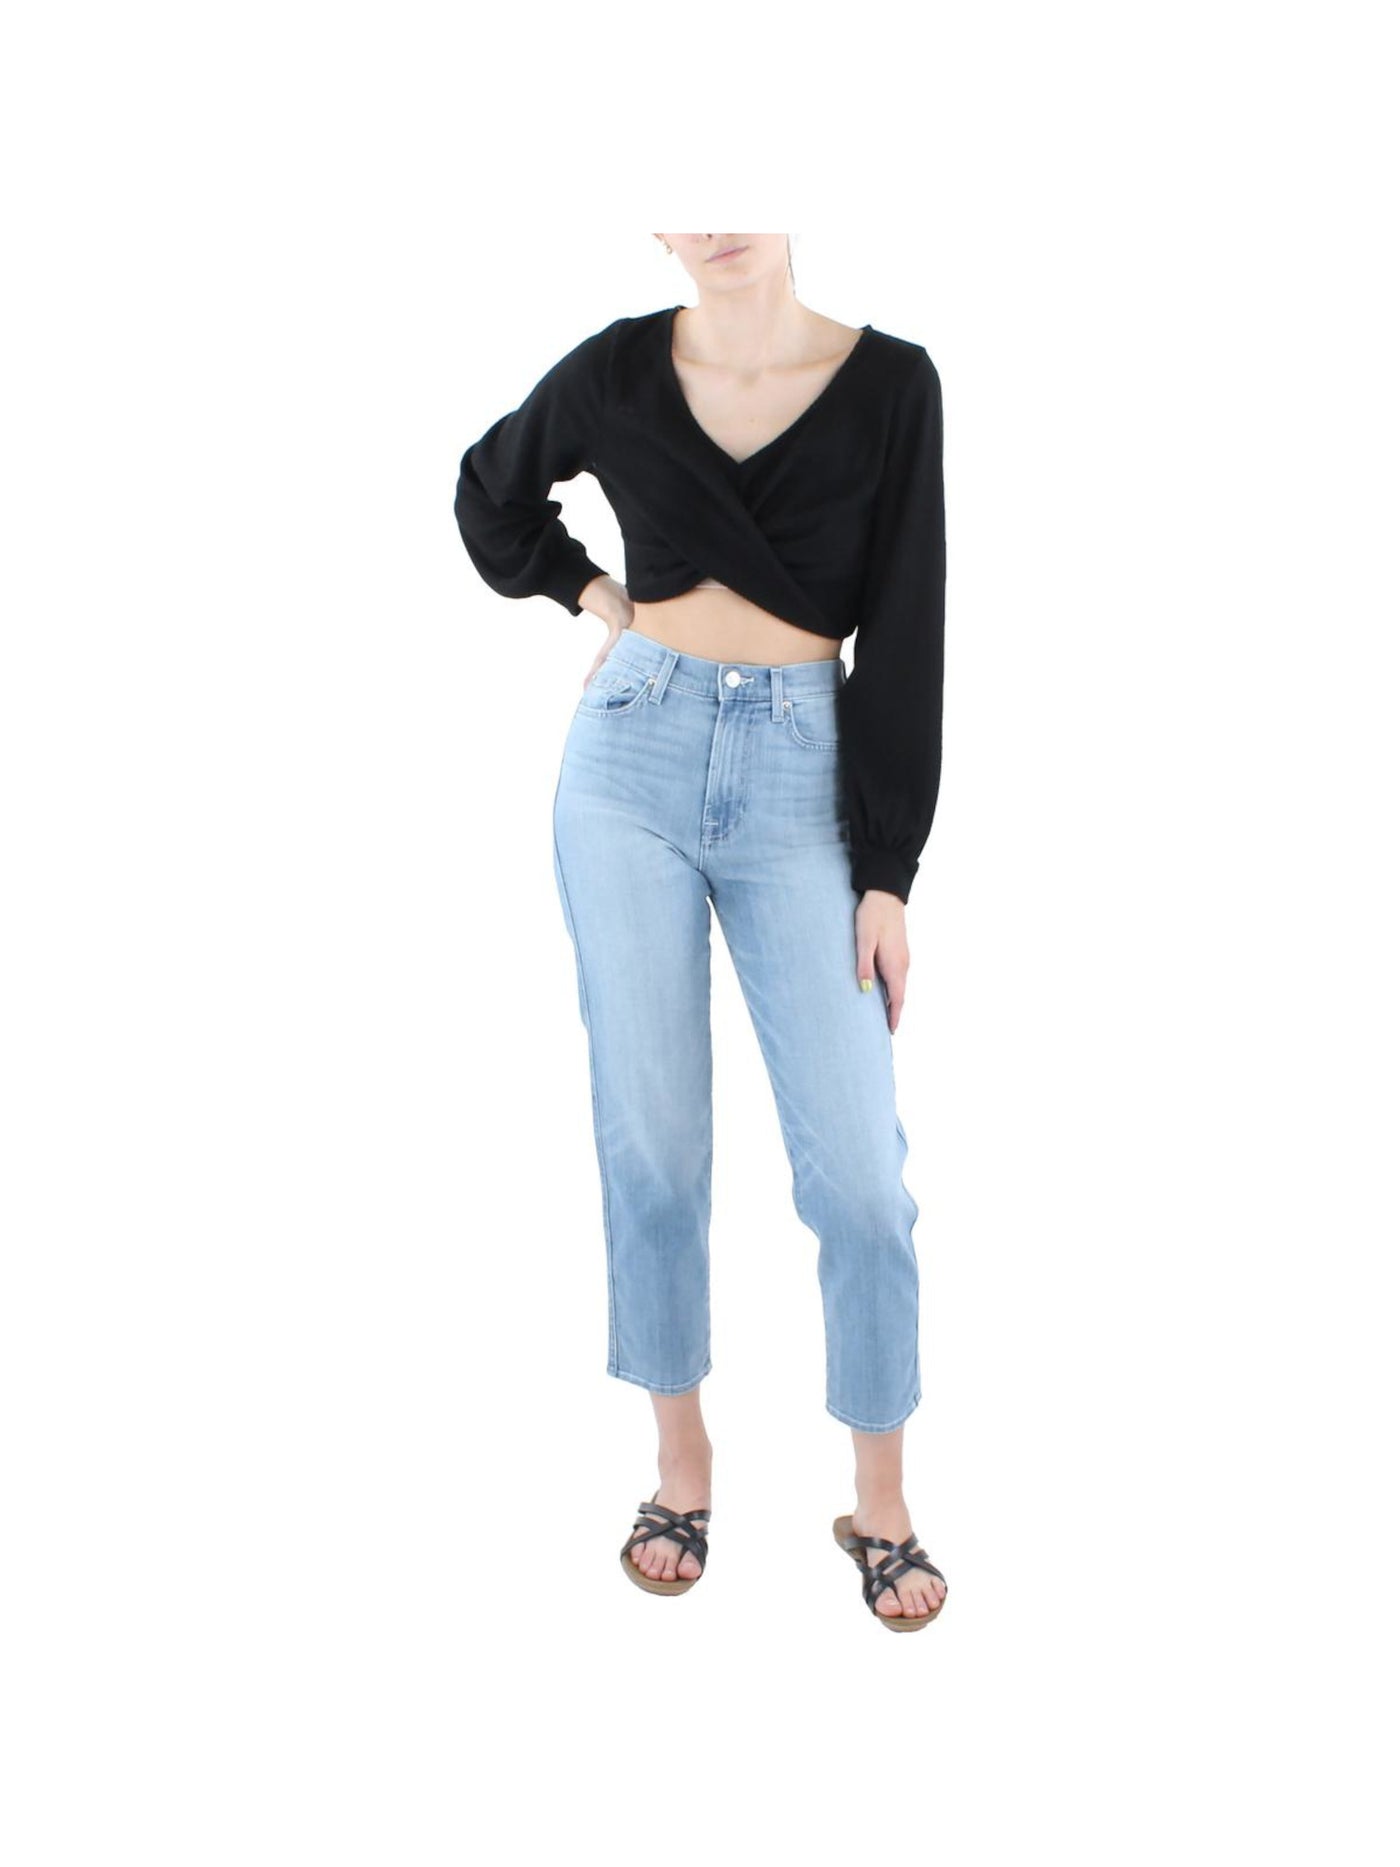 ALMOST FAMOUS Womens Black Ribbed Twist Front Balloon Sleeve V Neck Crop Top Sweater Juniors M